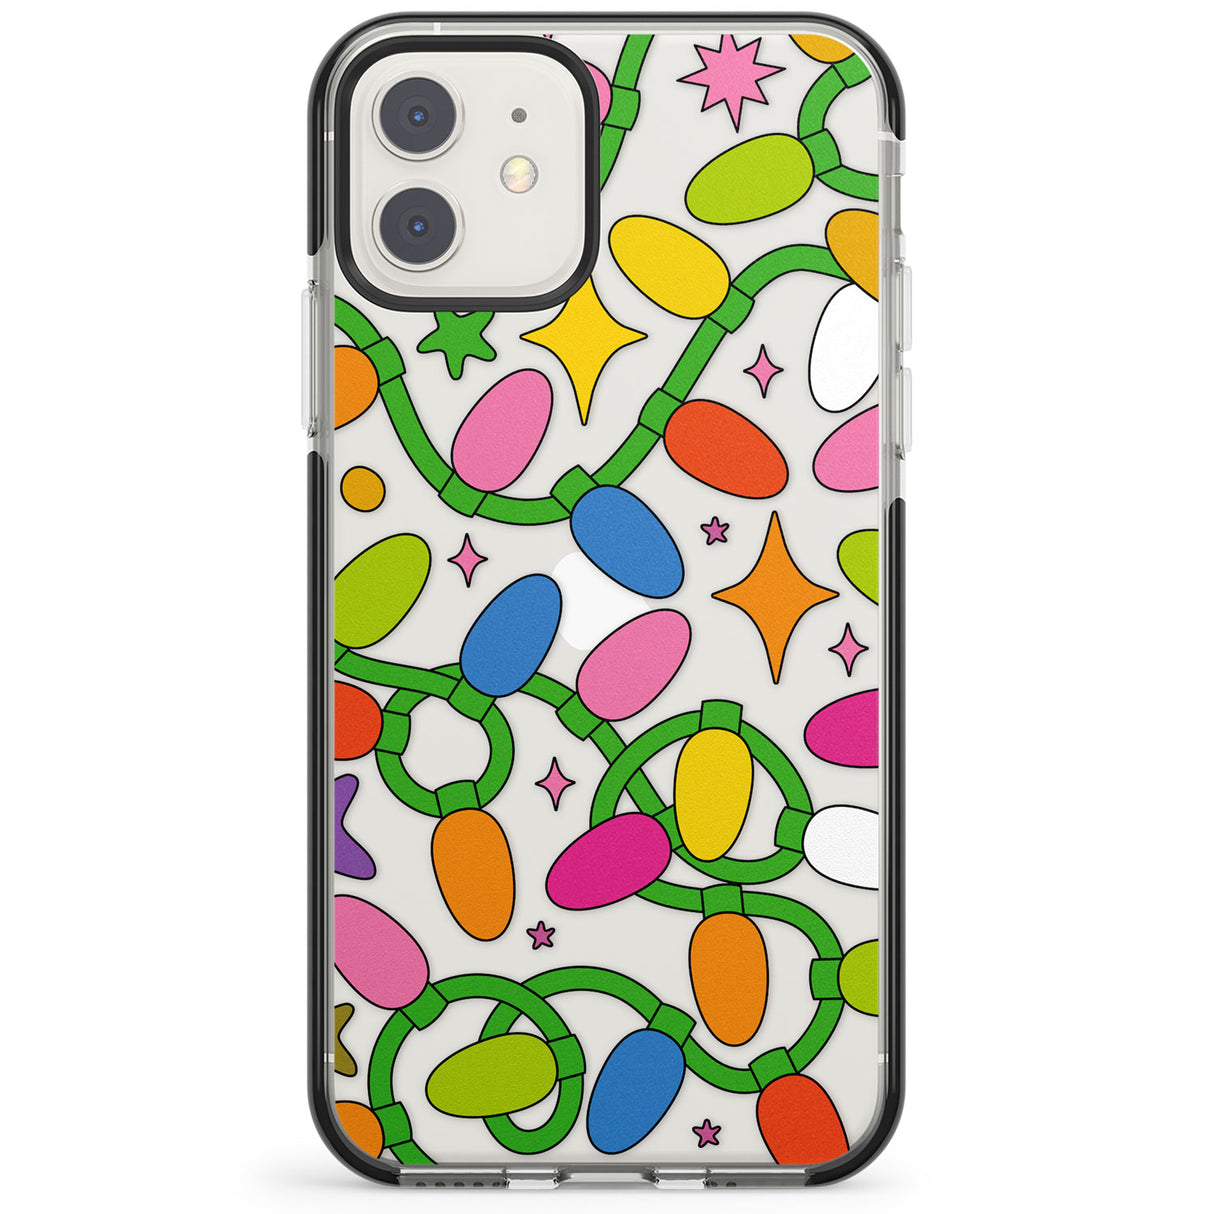 Festive Lights Pattern Impact Phone Case for iPhone 11, iphone 12